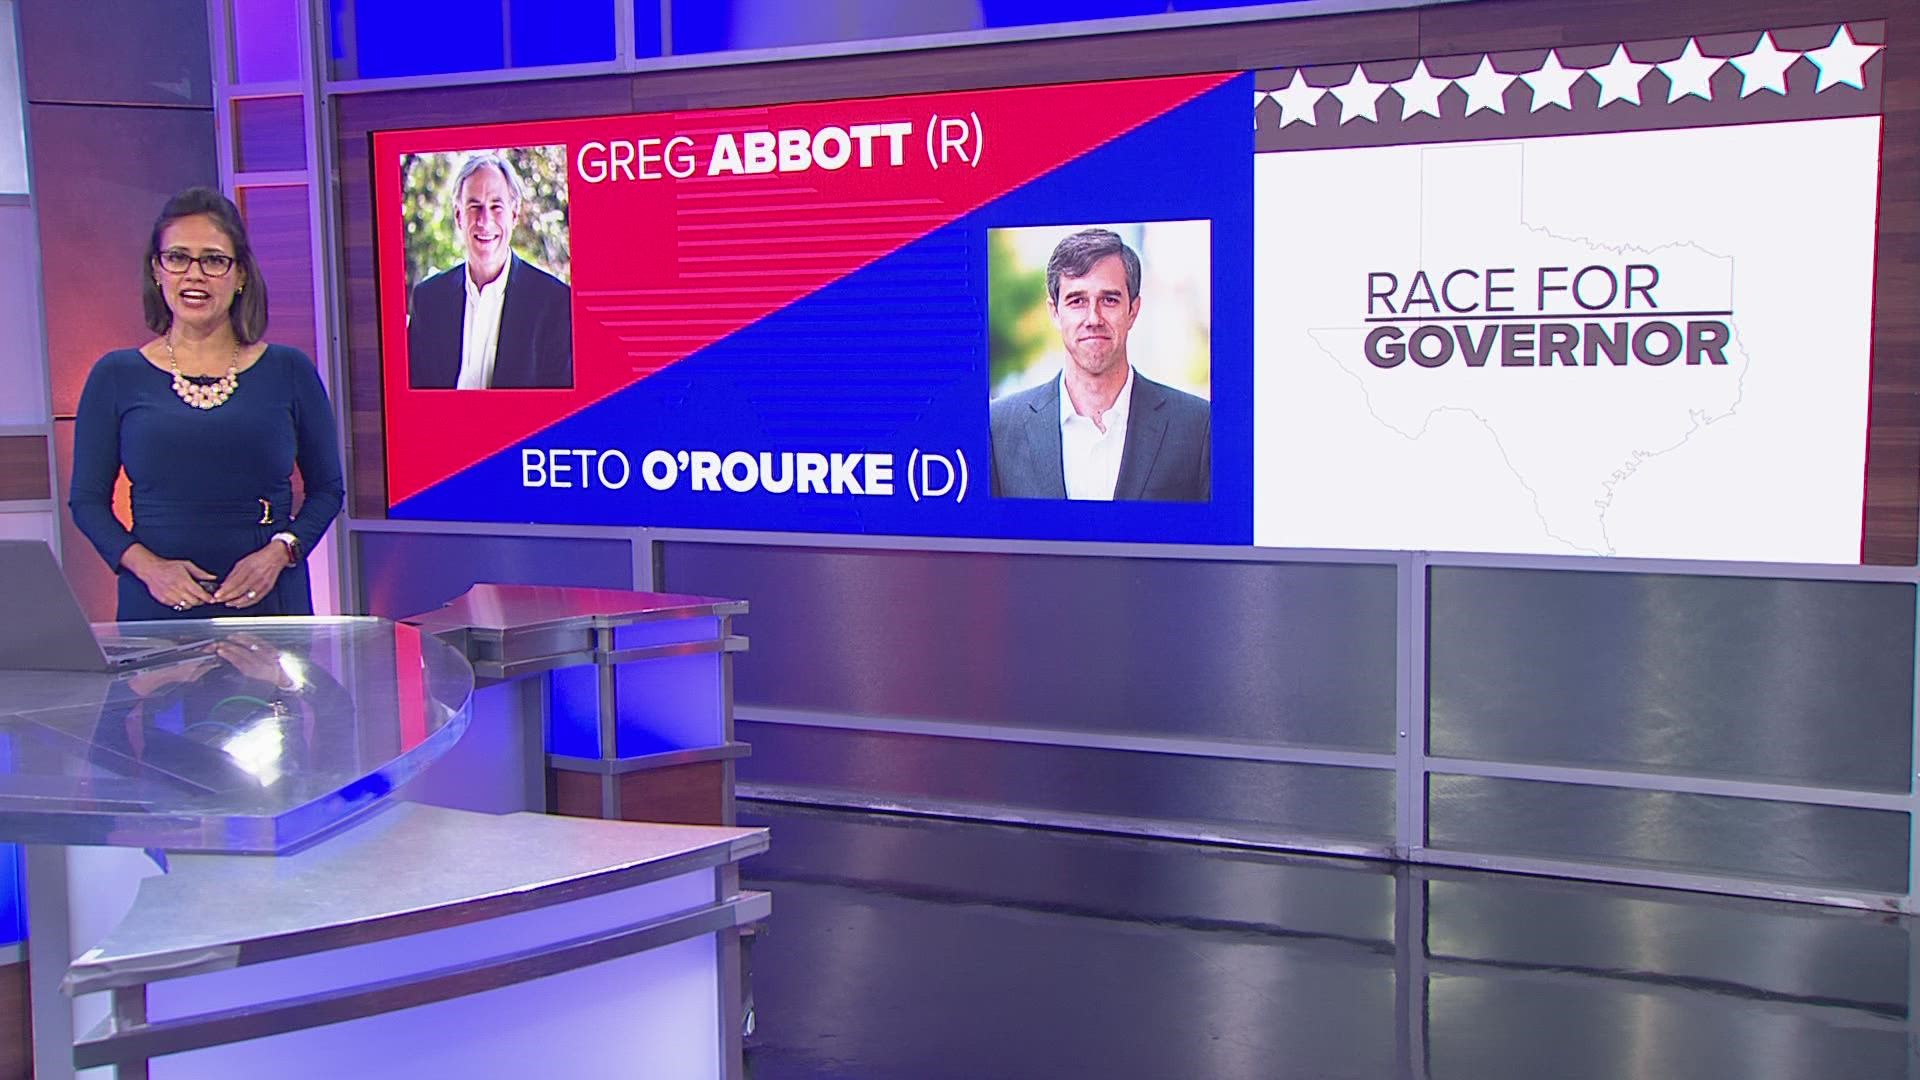 Beto O'Rourke is looking to make one last impact on voters in his sole debate with Gov. Abbott.